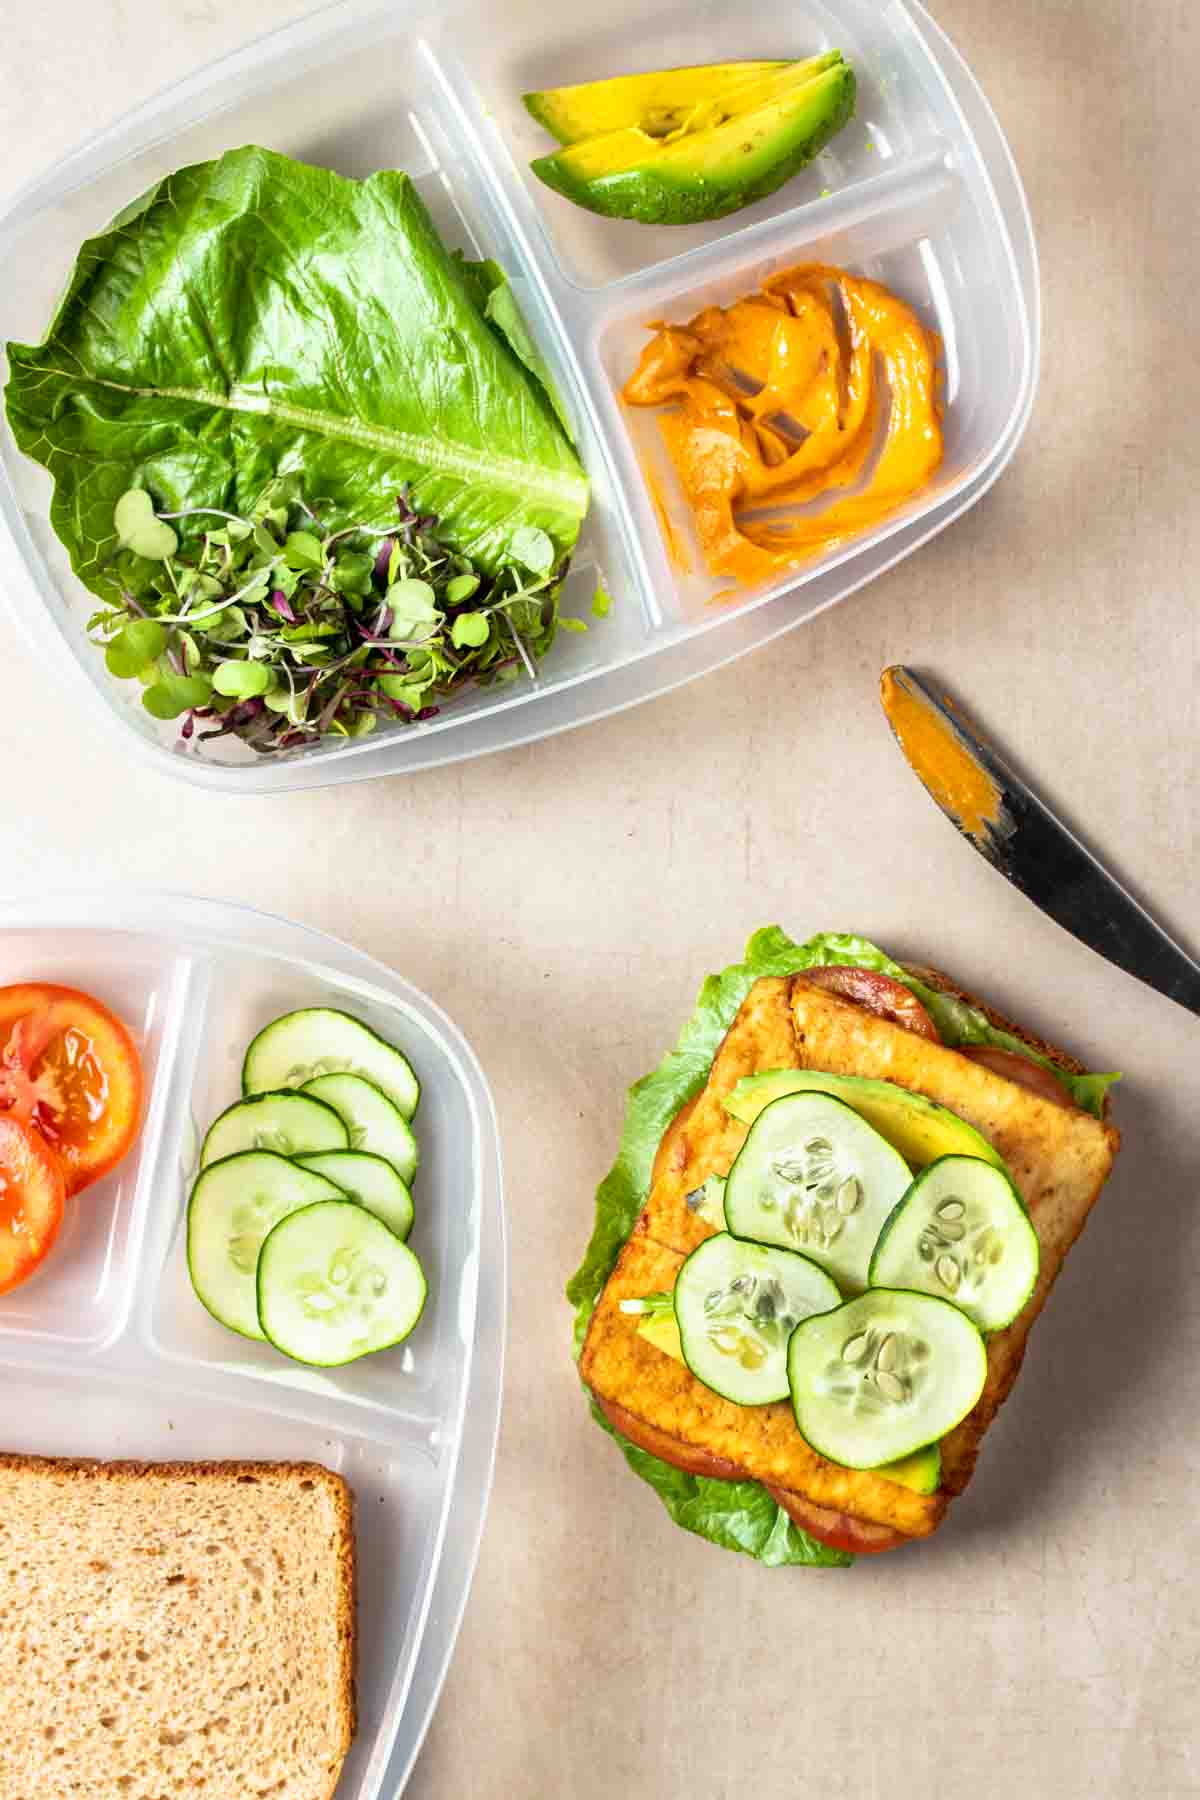 Sectioned containers with sandwich toppings next to a knife and an open faced sandwich with lettuce, sliced tofu and cucumbers on top.